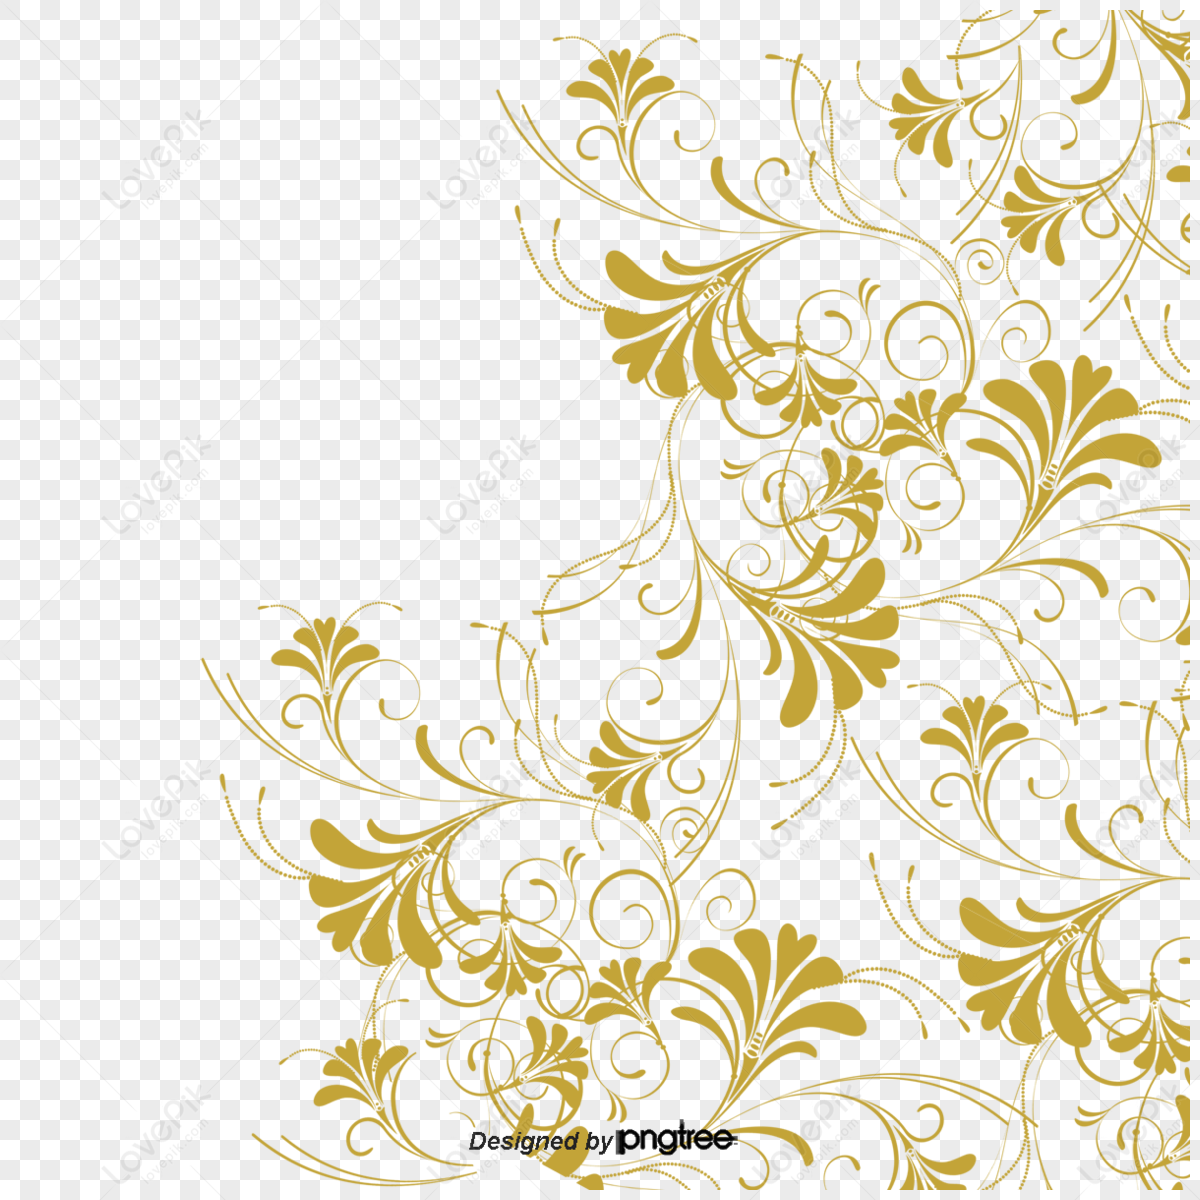 Simple Flower Line PNG Images With Transparent Background | Free ...